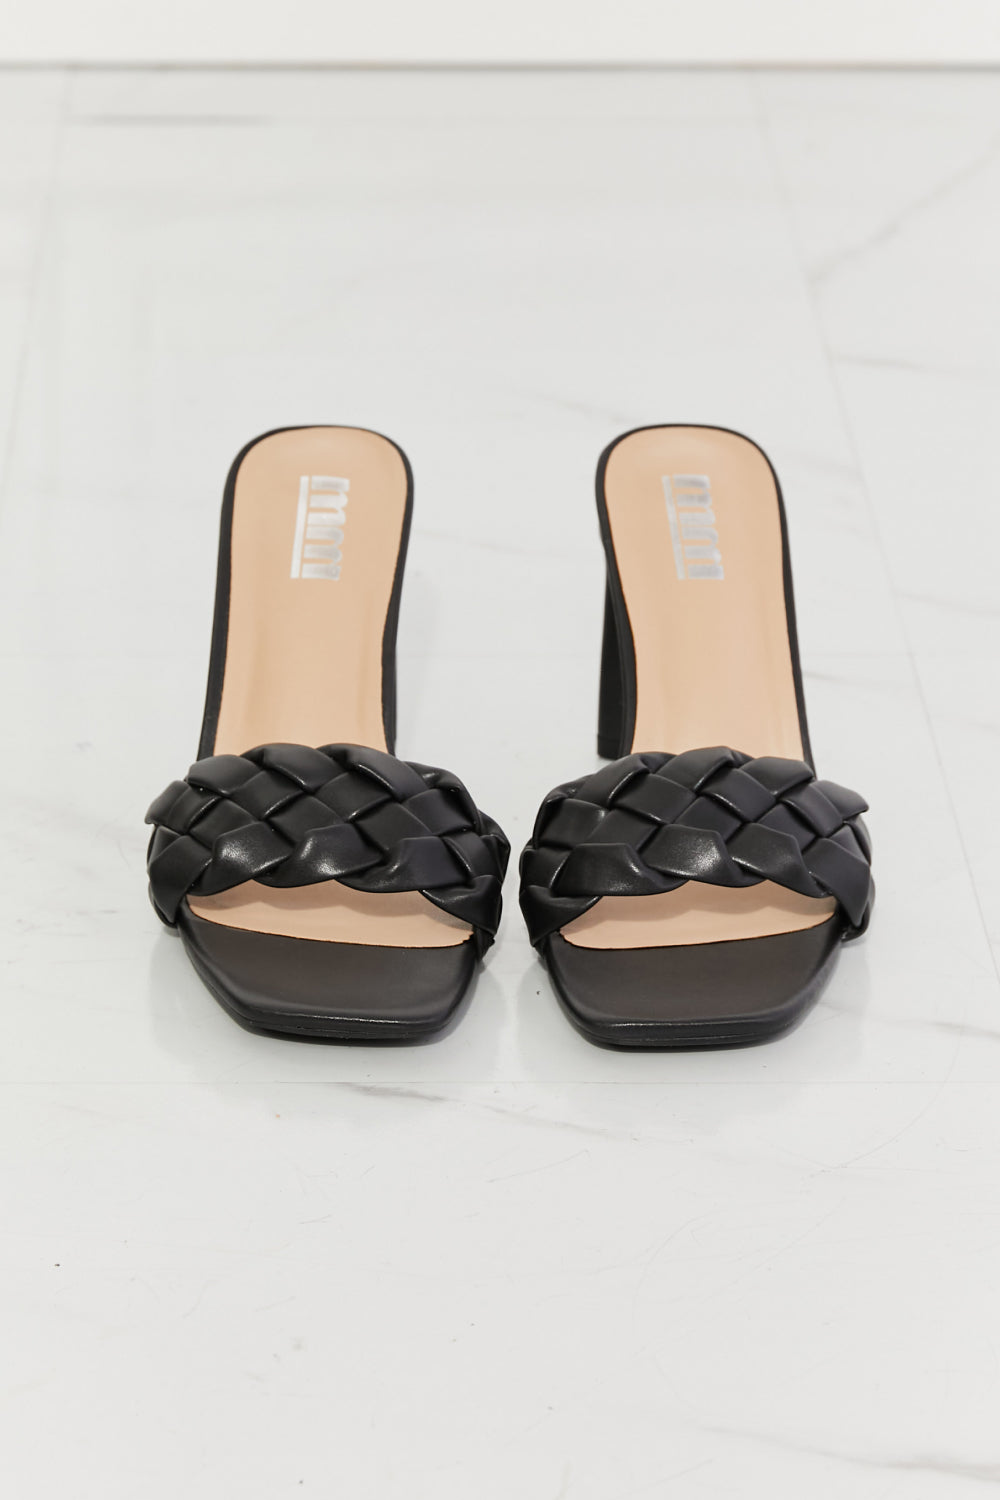 MMShoes Top of the World Braided Block Heel Sandals in Black - BEAUTY COSMOTICS SHOP